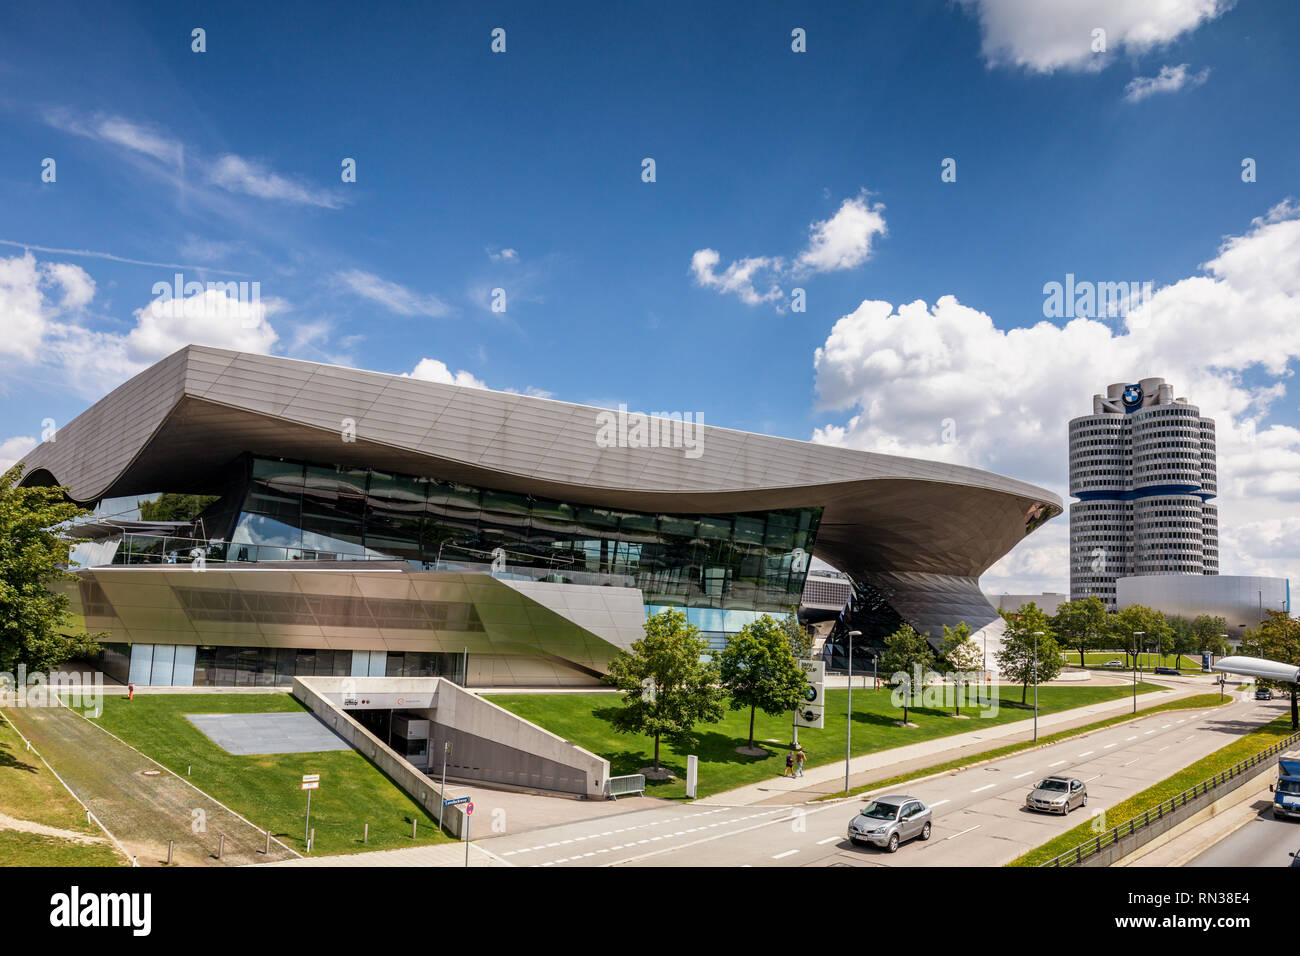 BMW Welt building & BMW headquarters, Munich. BMW Welt is a big showroom where cars of the BMW group (BMW, Mini and Rolls Royce) are on display. Stock Photo